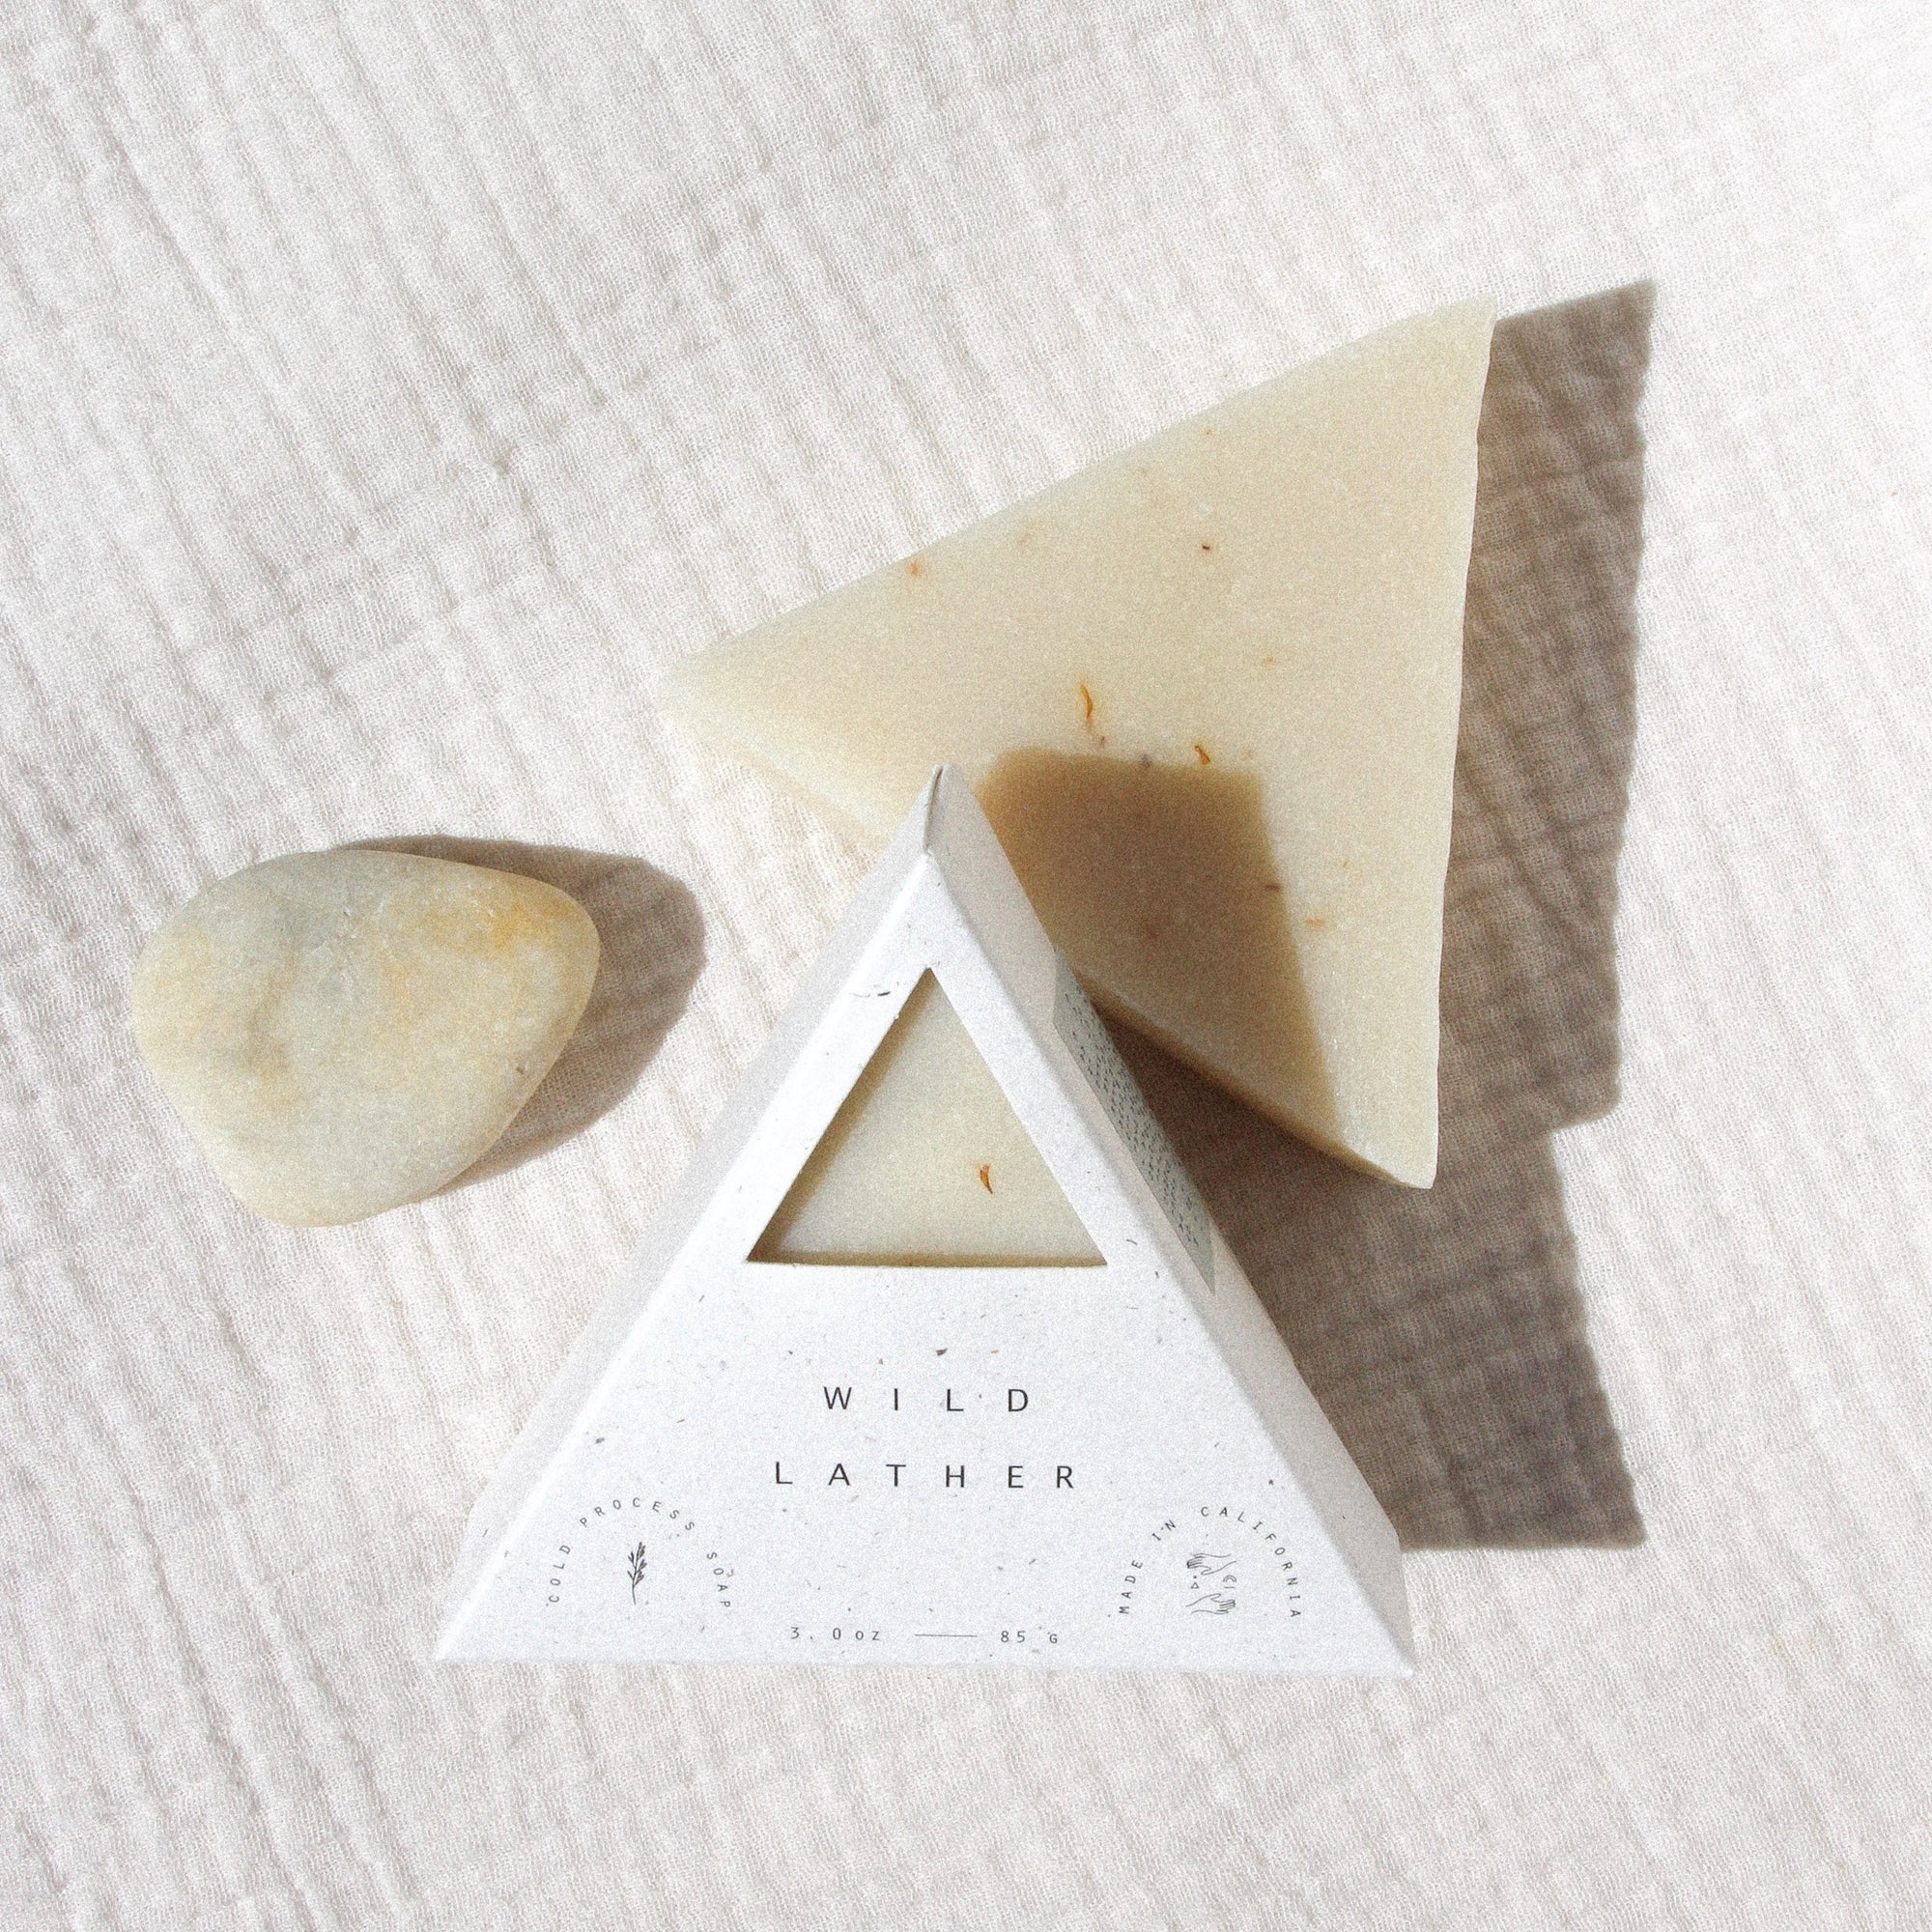 Two soaps and  a stone against textured beige linen